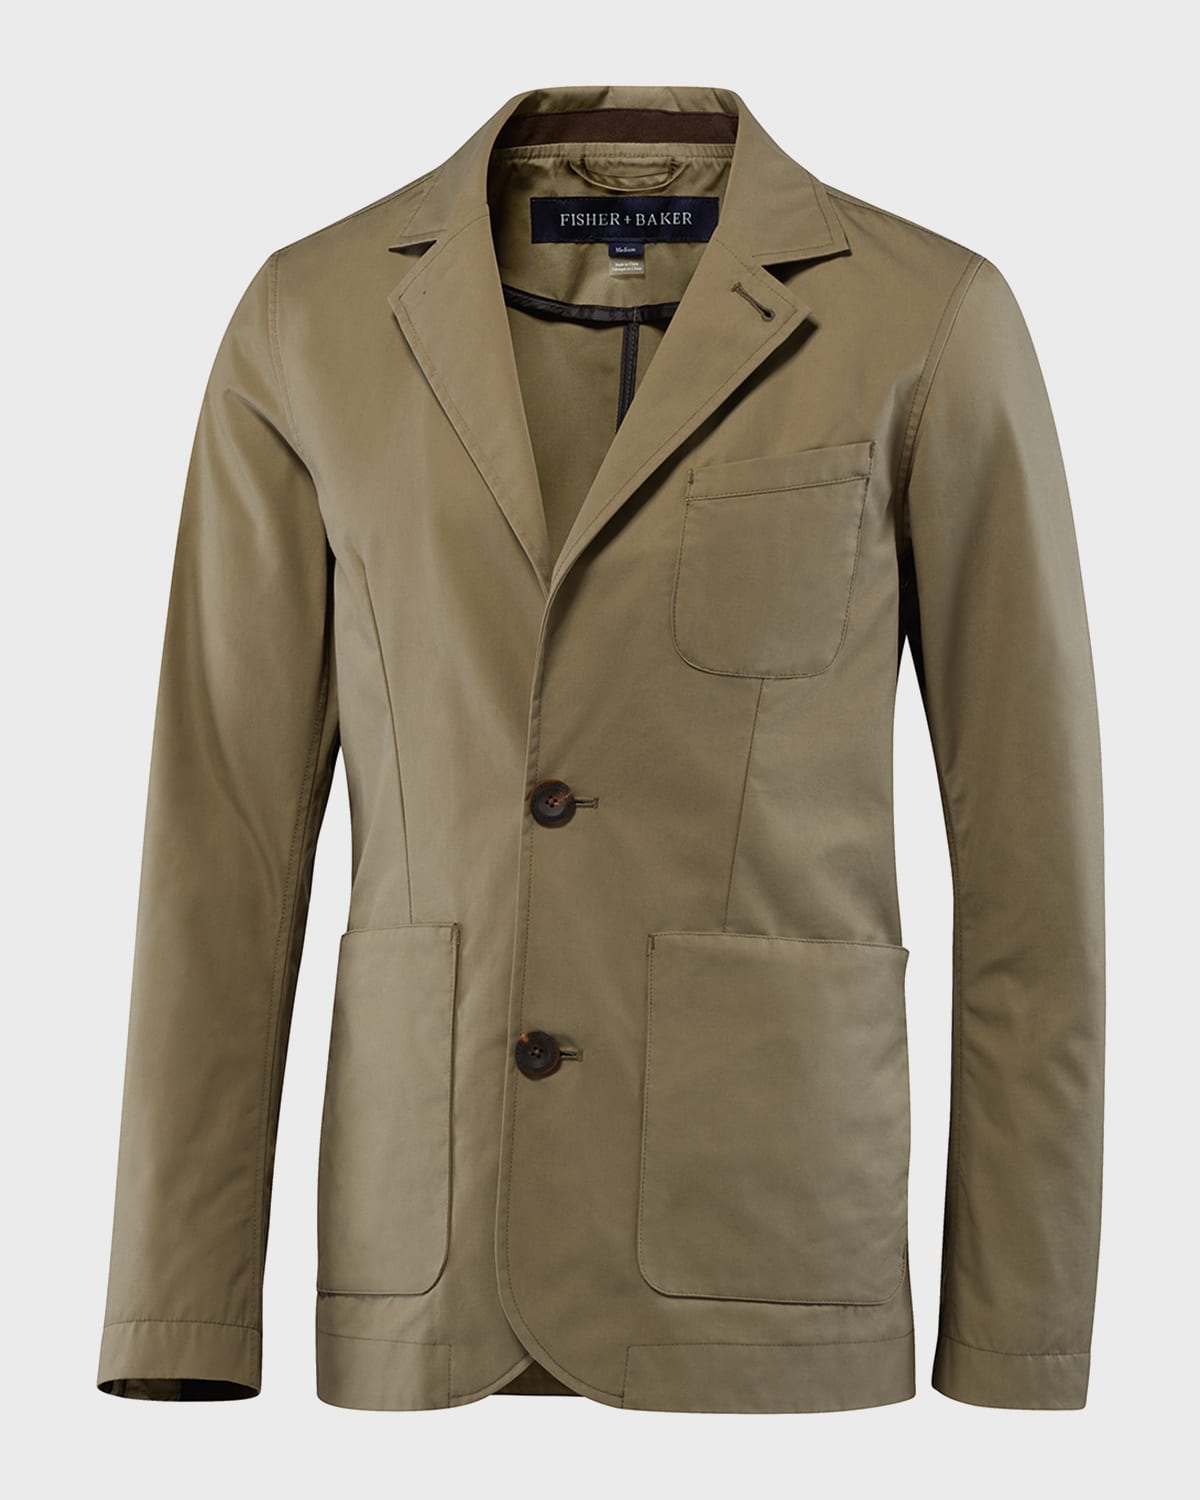 Fisher + Baker Men's Thompson Two-Button Jacket